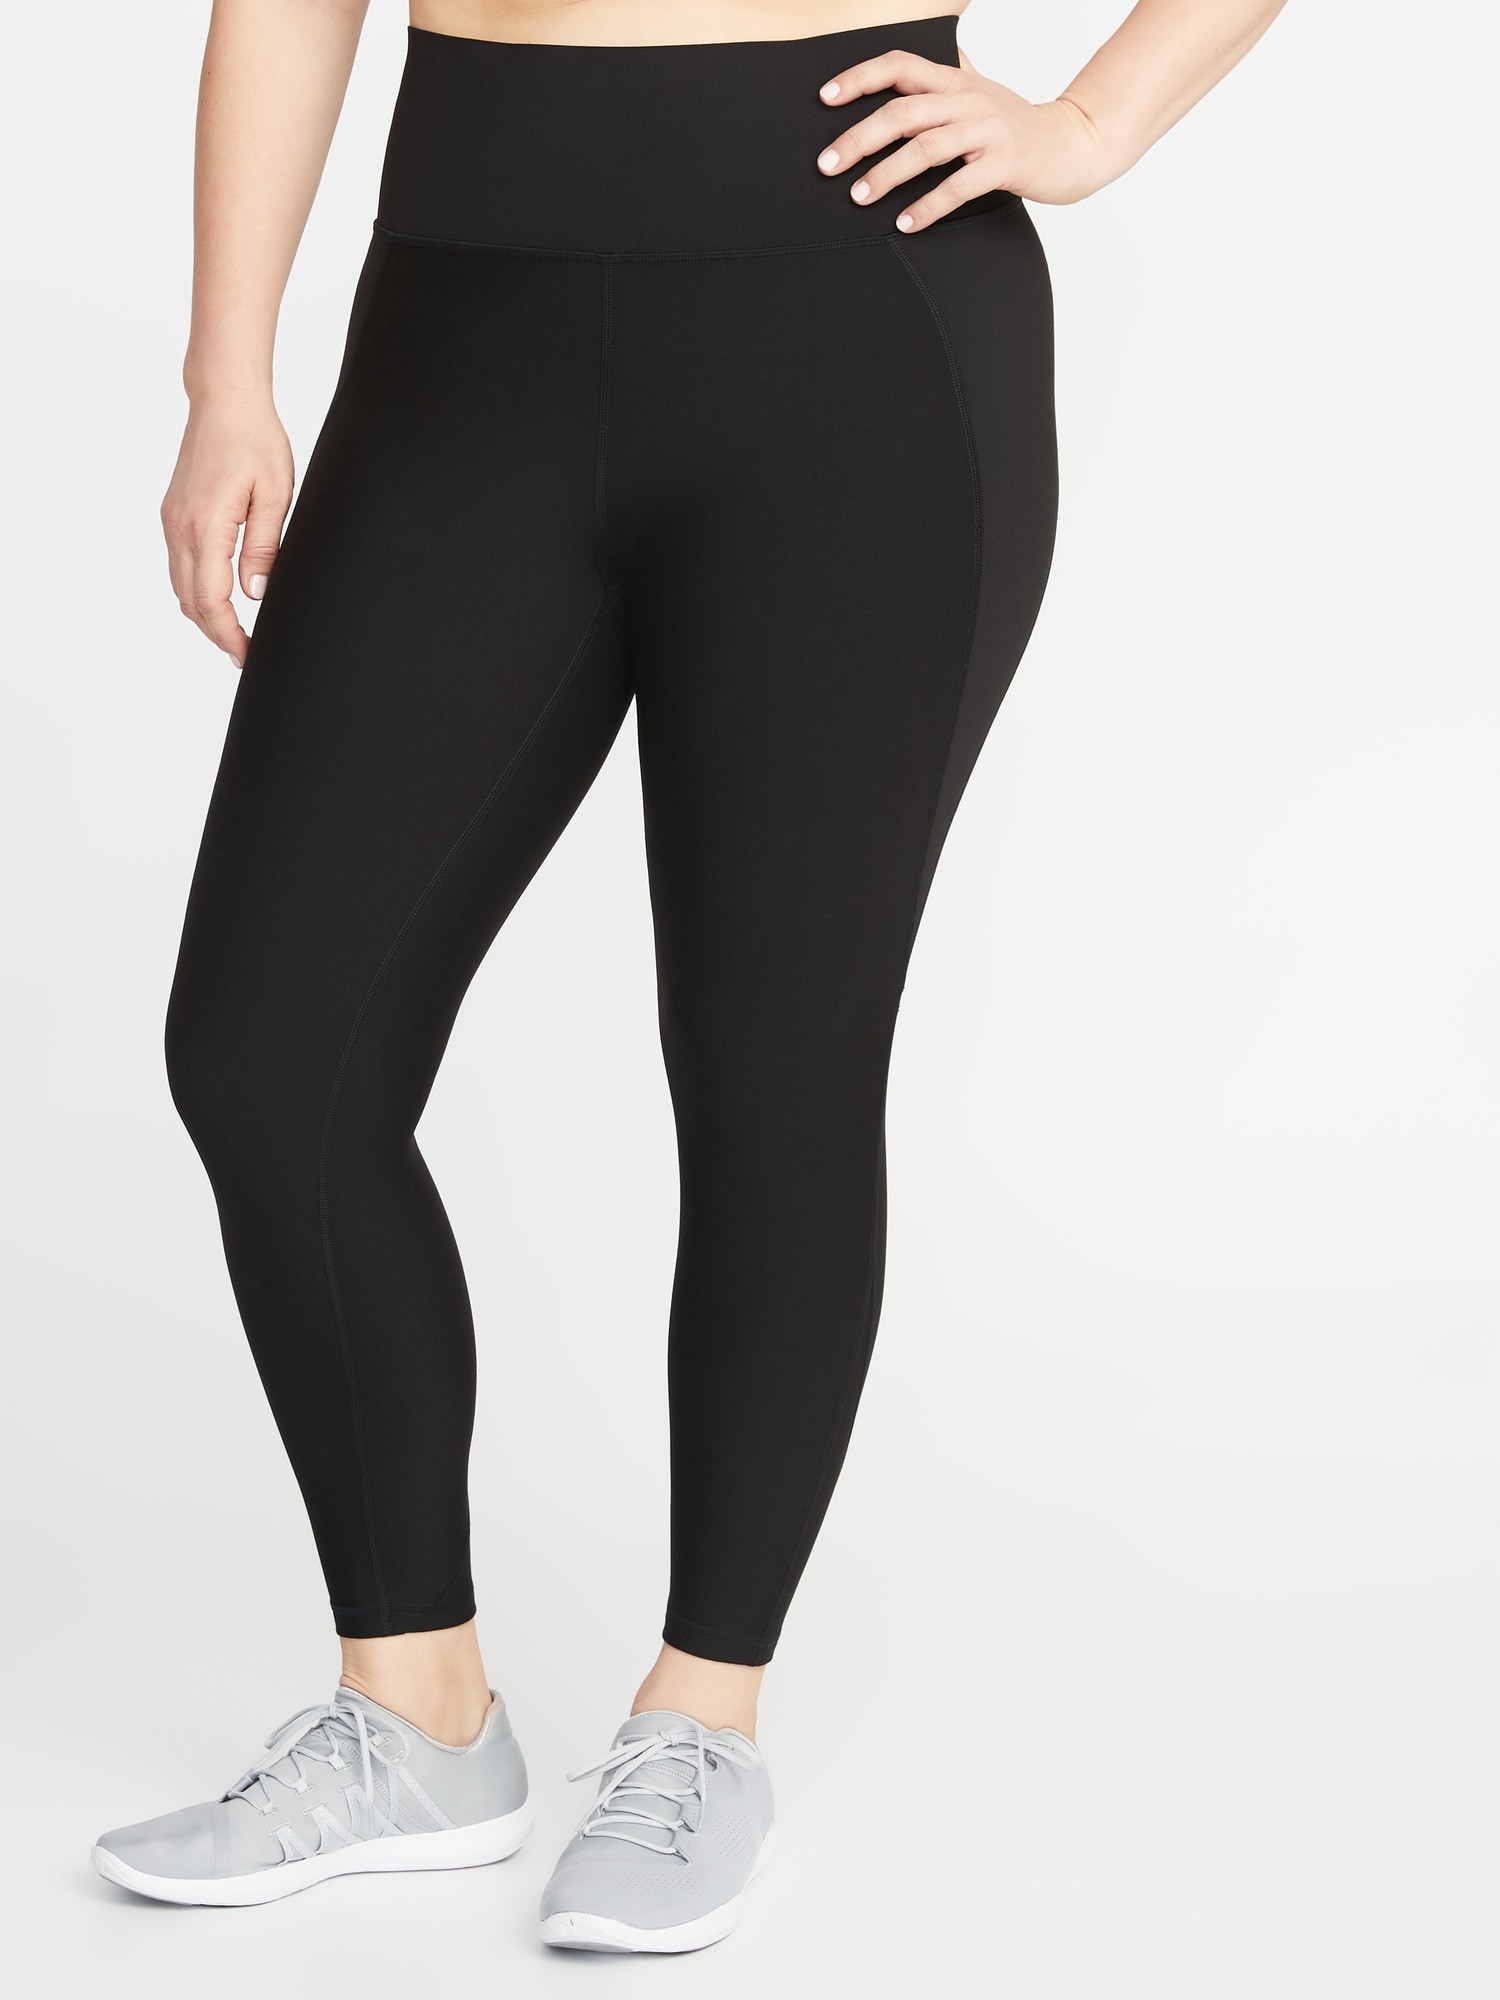 Old Navy Active Go Dry Elevate Leggings Black Size M - $18 (35